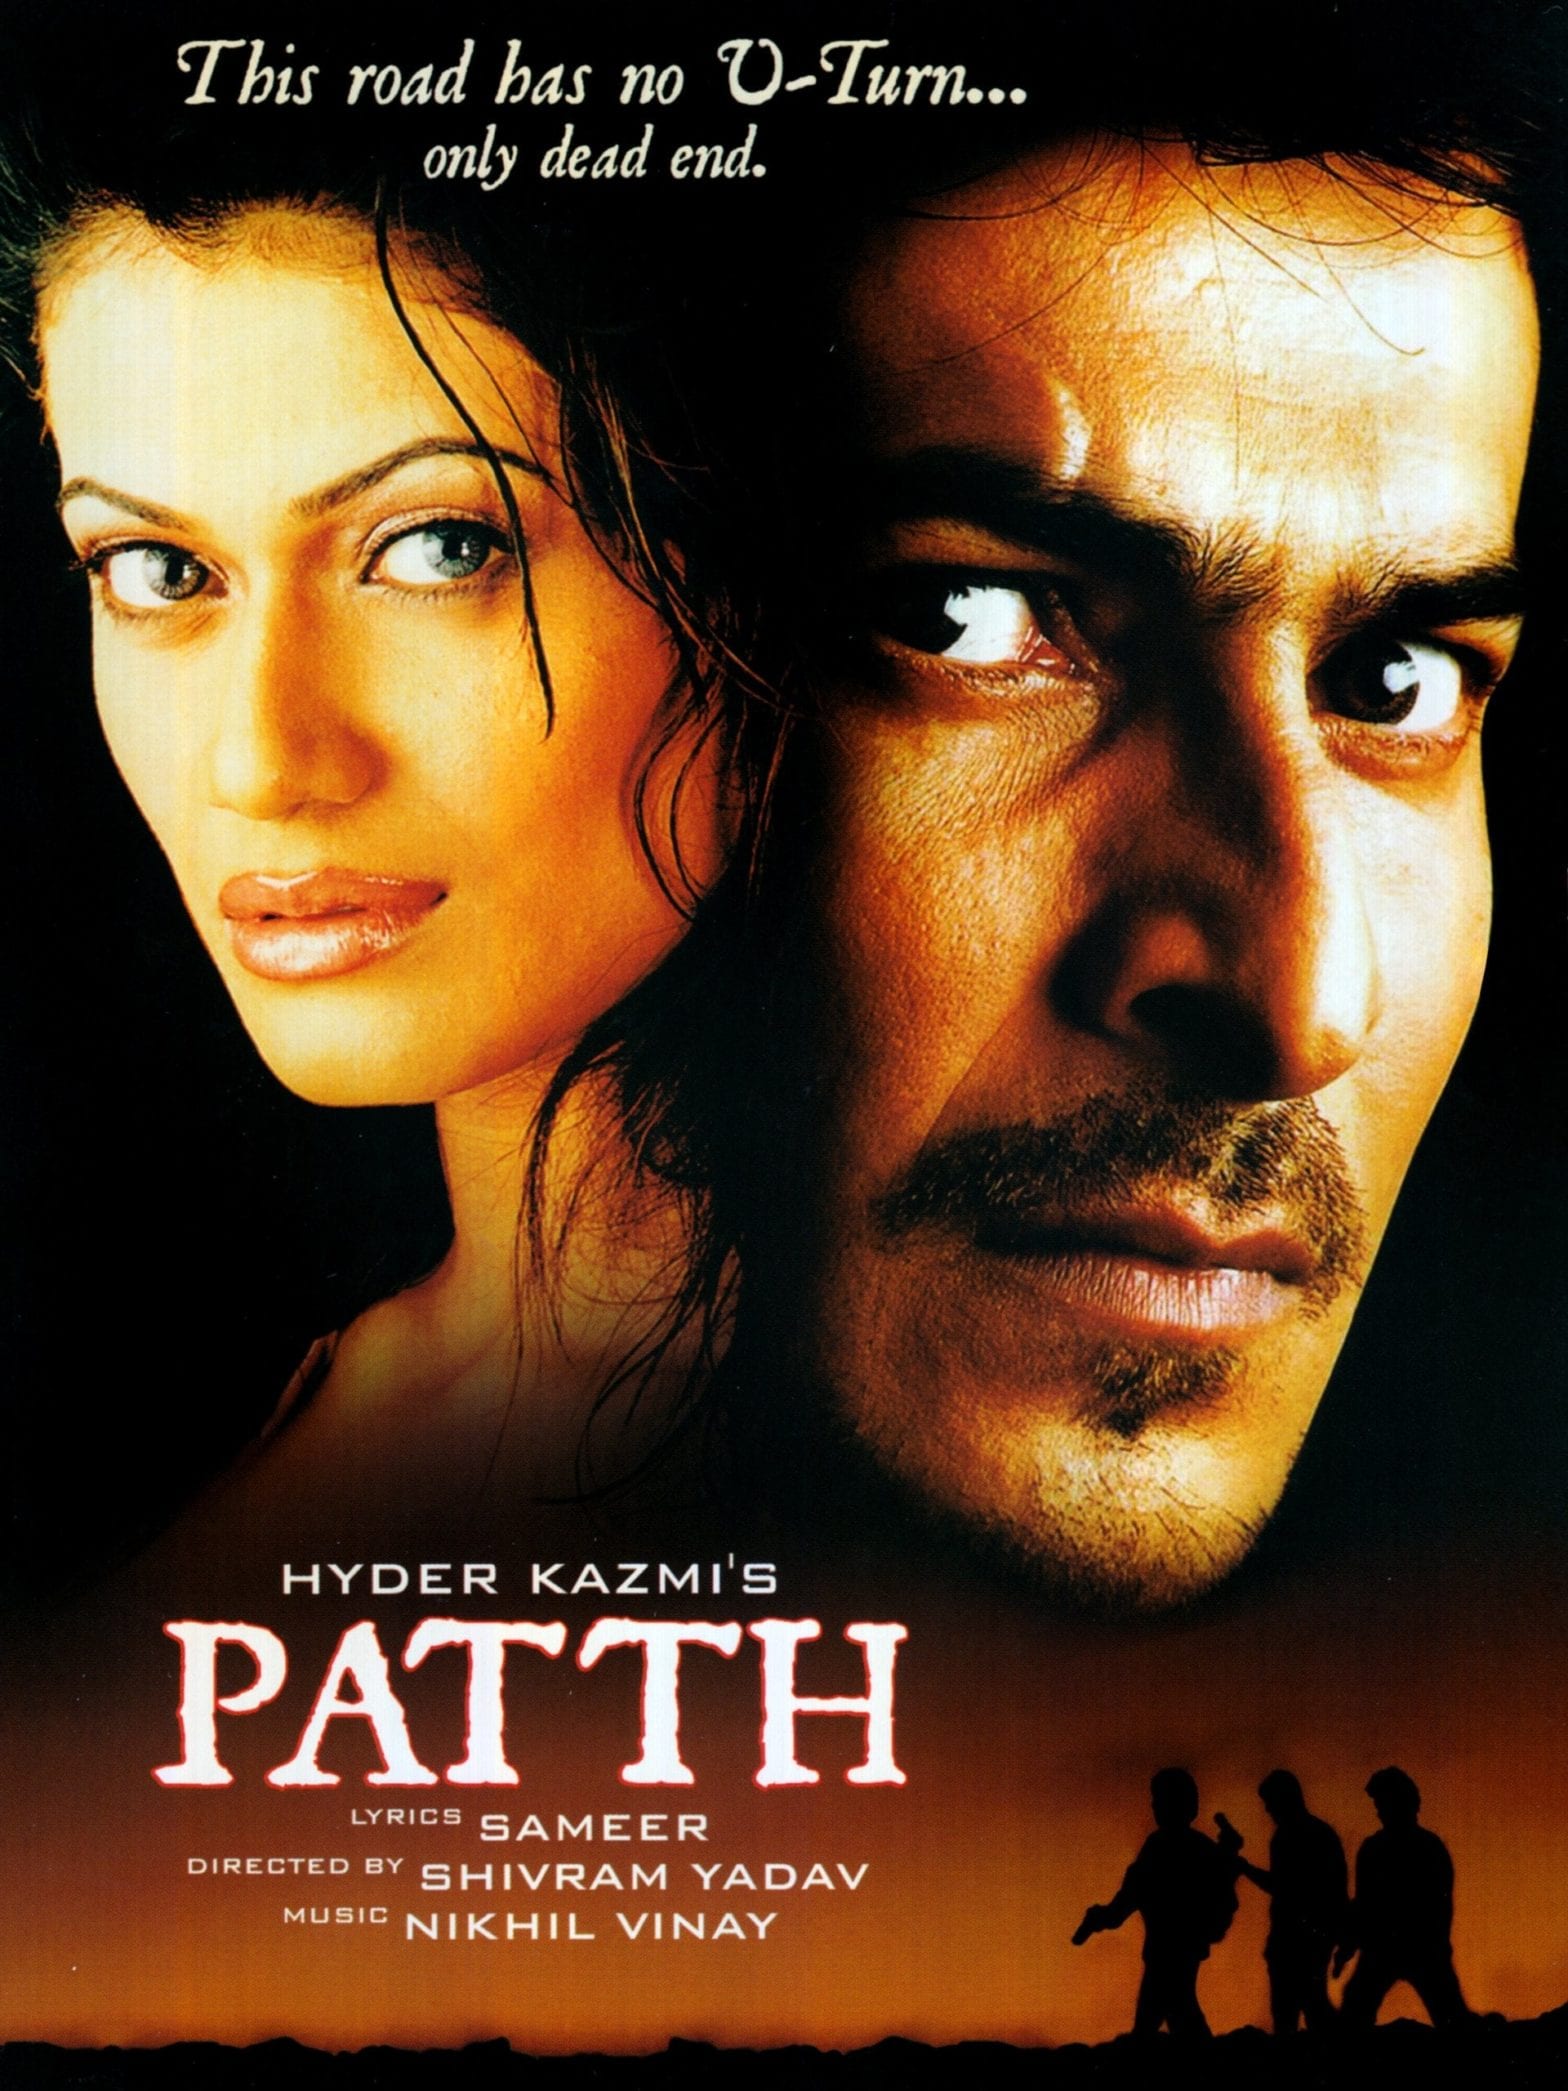 Poster for the movie "Patth"